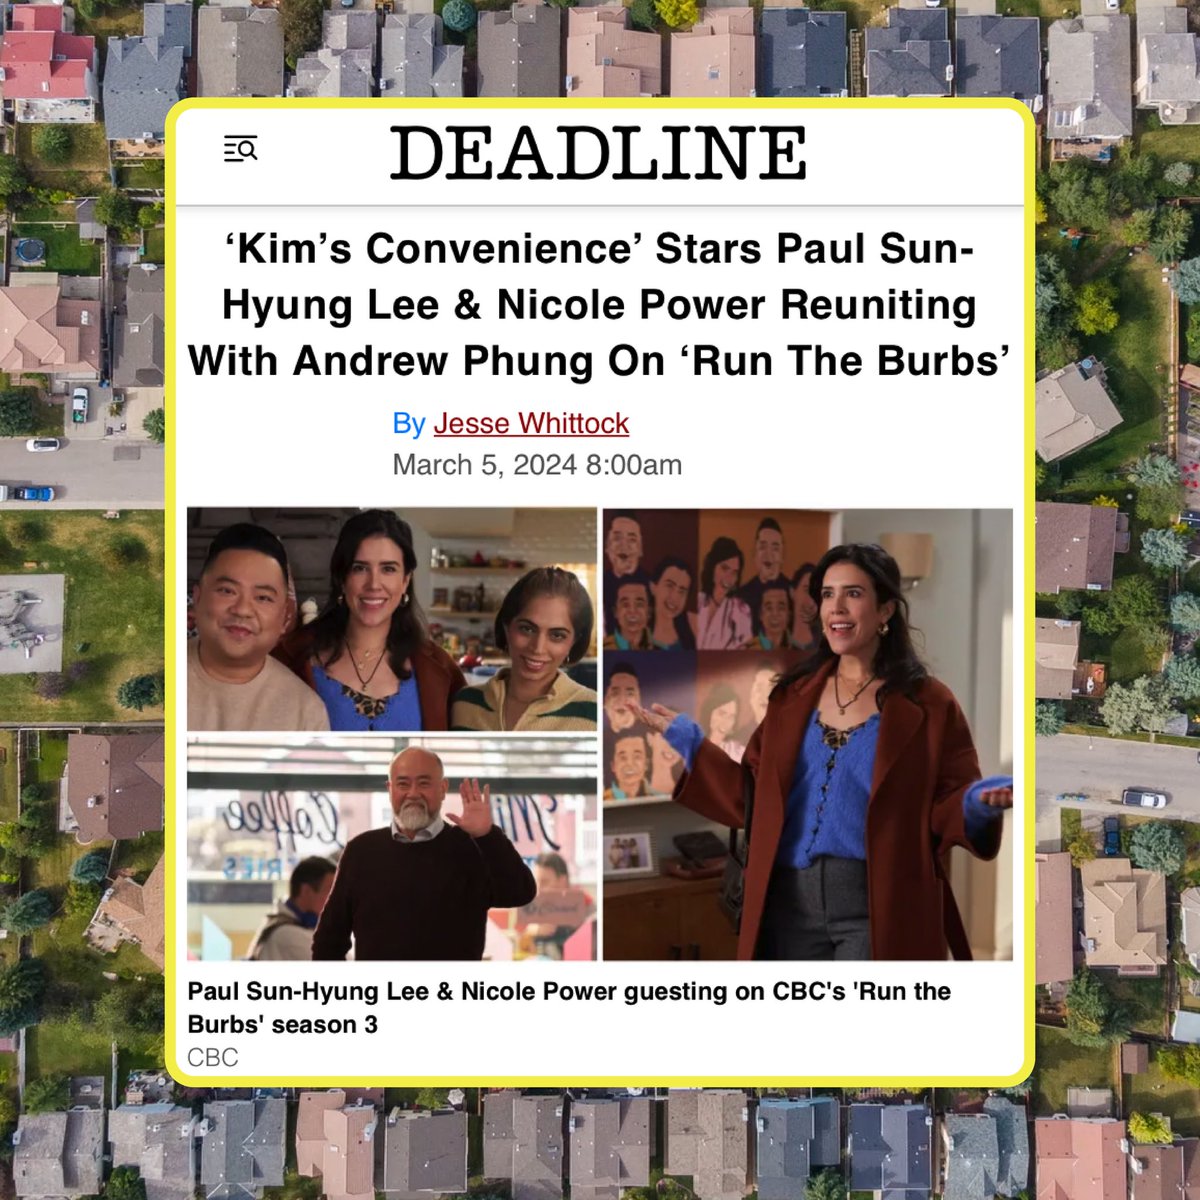 Sneak attack! I’m so excited to announce that @bitterasiandude and @NicolePower3 are guest starring in upcoming episodes of #runtheburbs! It’s a dream come true to be reunited with these two comedy powerhouses! Tuesdays at 9:30pm and streaming on 🇨🇦 @cbcgem! ❤️